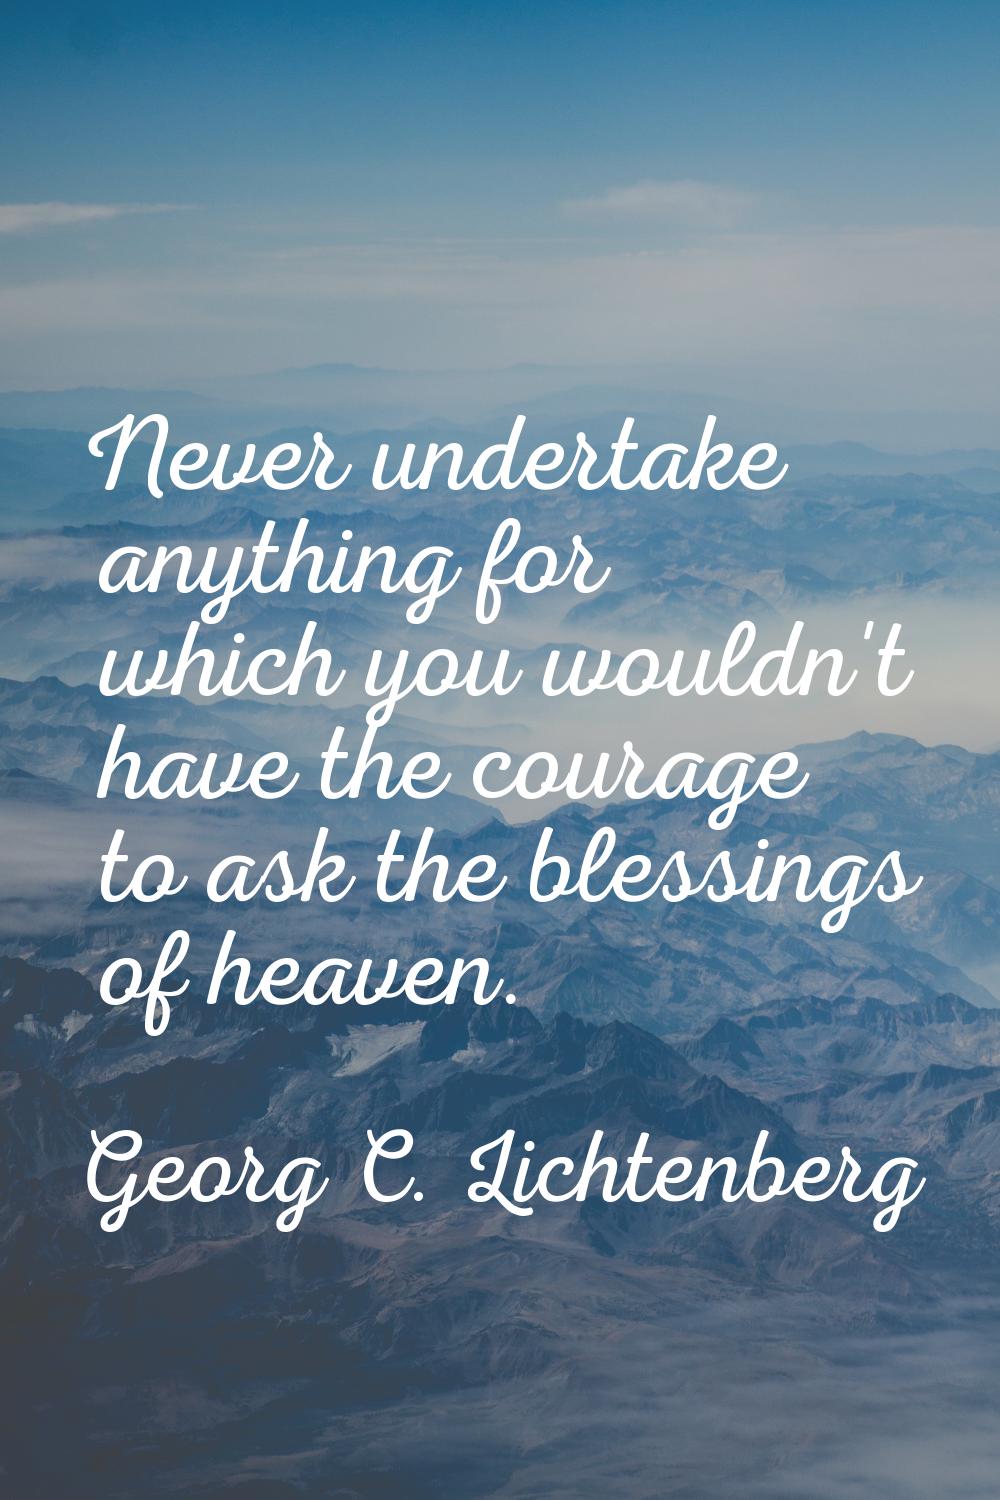 Never undertake anything for which you wouldn't have the courage to ask the blessings of heaven.